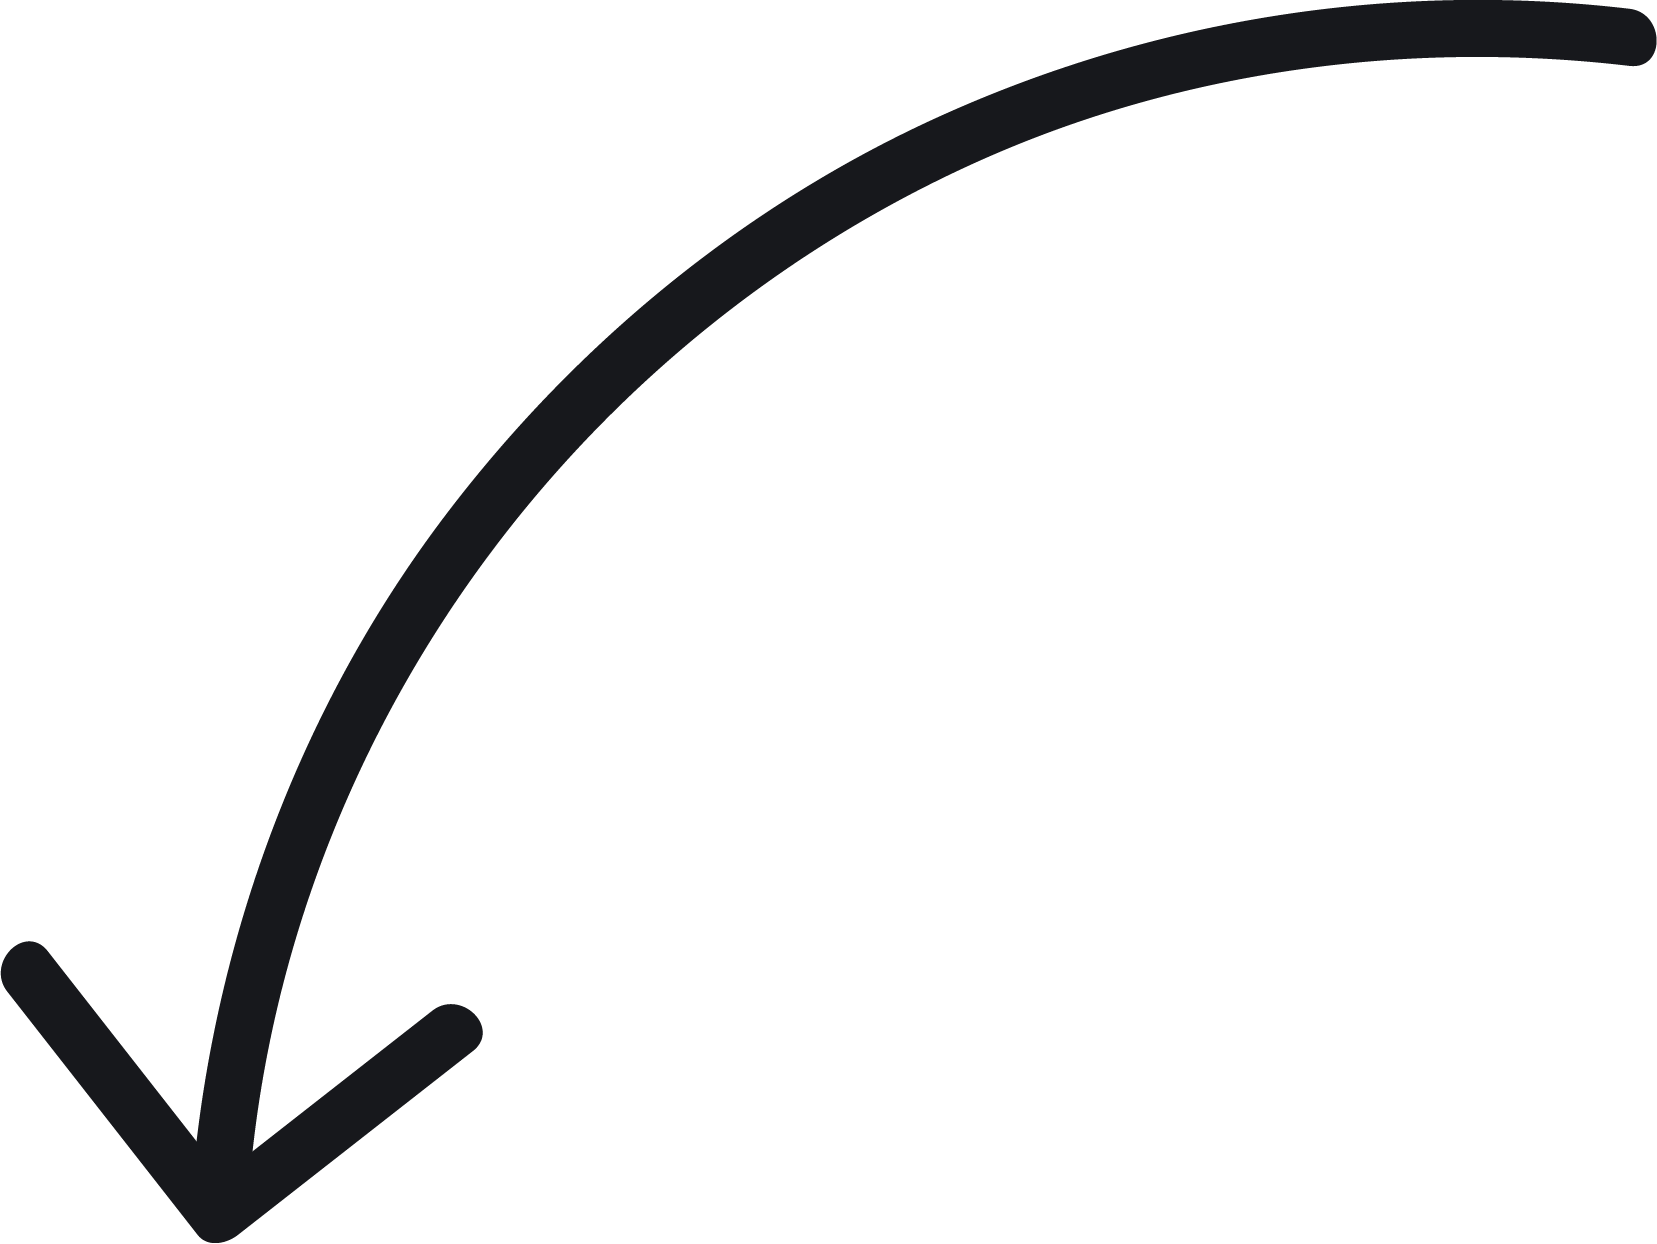 Curved Arrow Tool - Black Curved Arrow Png (1657x1244)